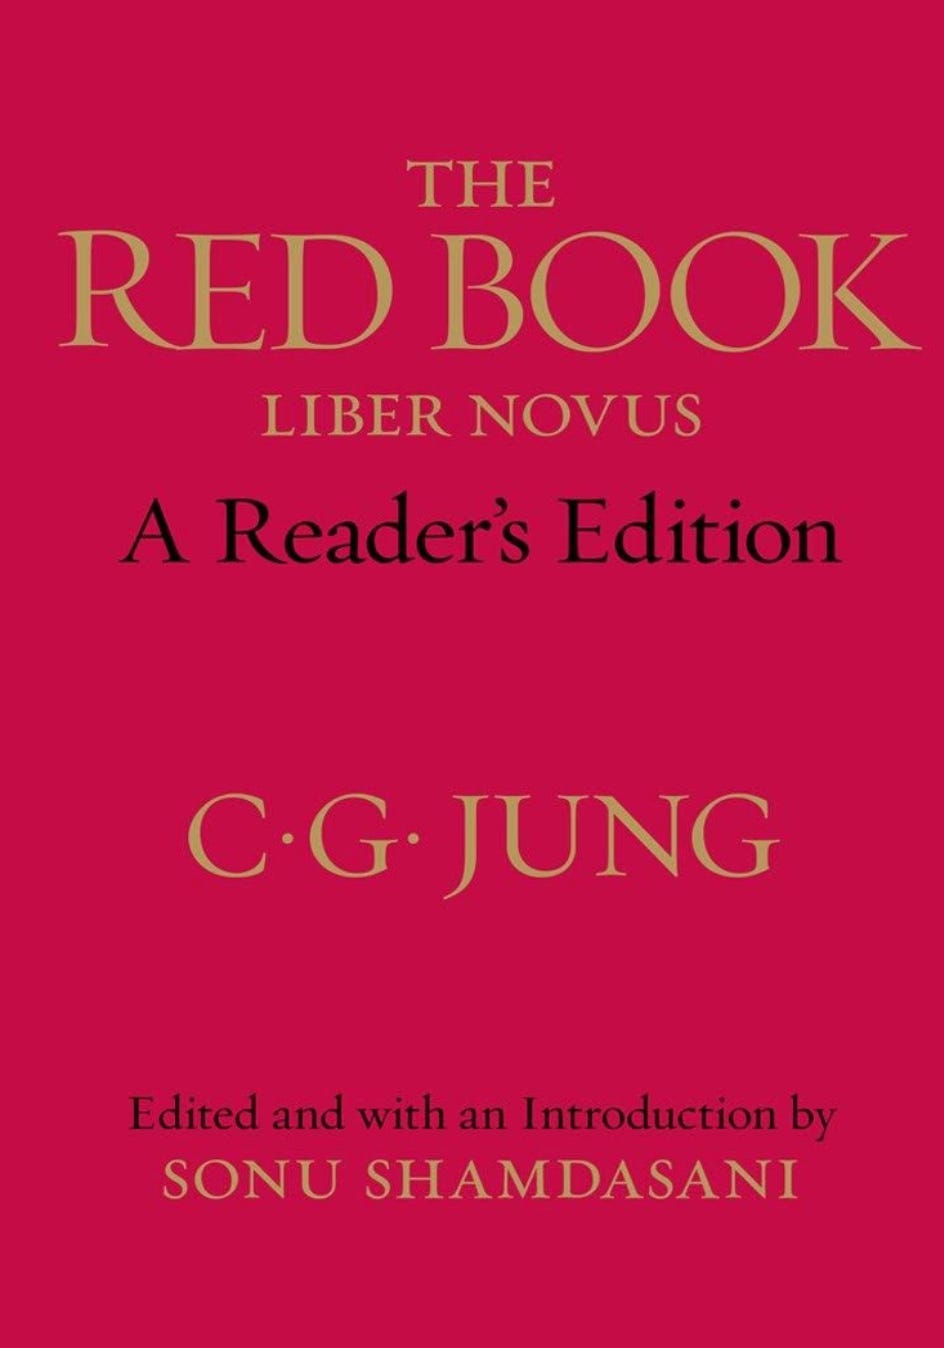 Cover of the Red Book, By Carl Jung